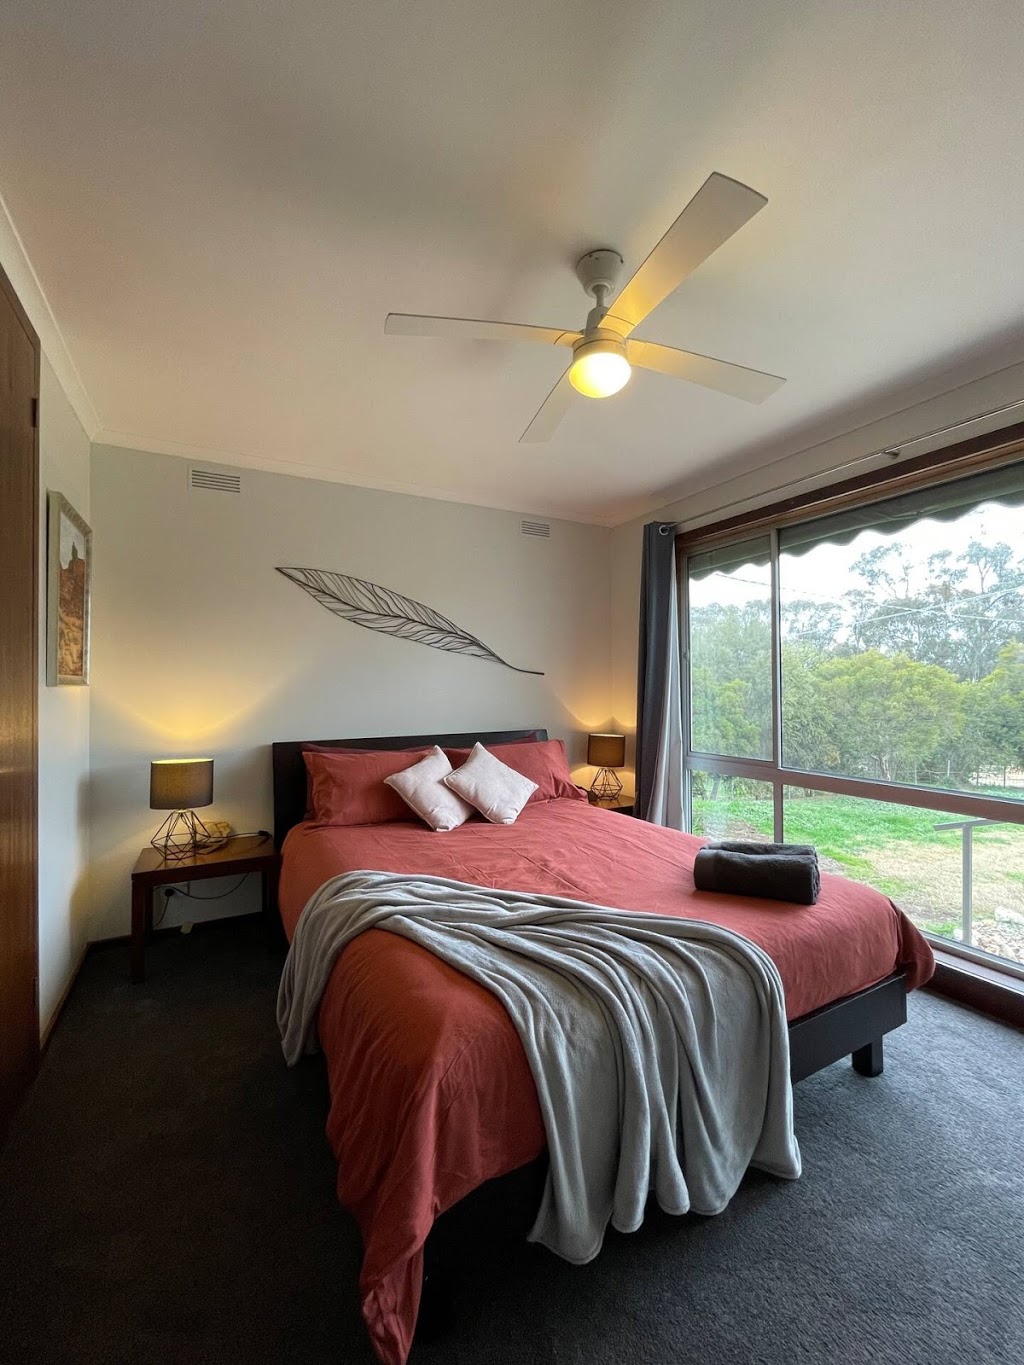 Barkly Street Retreat | lodging | 15 Barkly St, Dunolly VIC 3472, Australia | 0405770287 OR +61 405 770 287